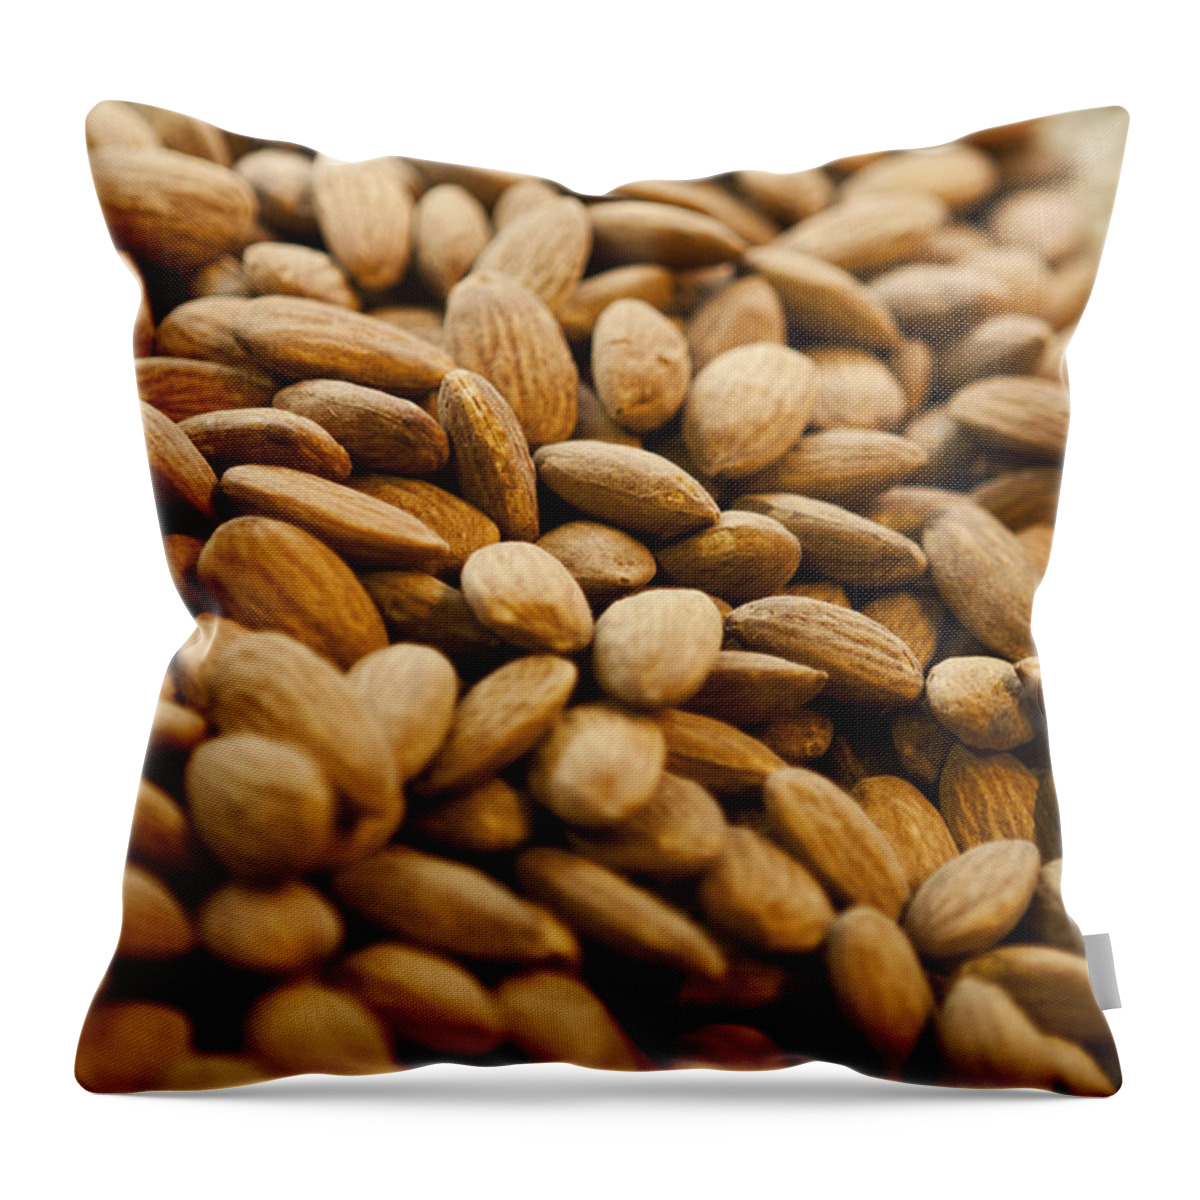 Almond Throw Pillow featuring the photograph Almonds by Leslie Leda